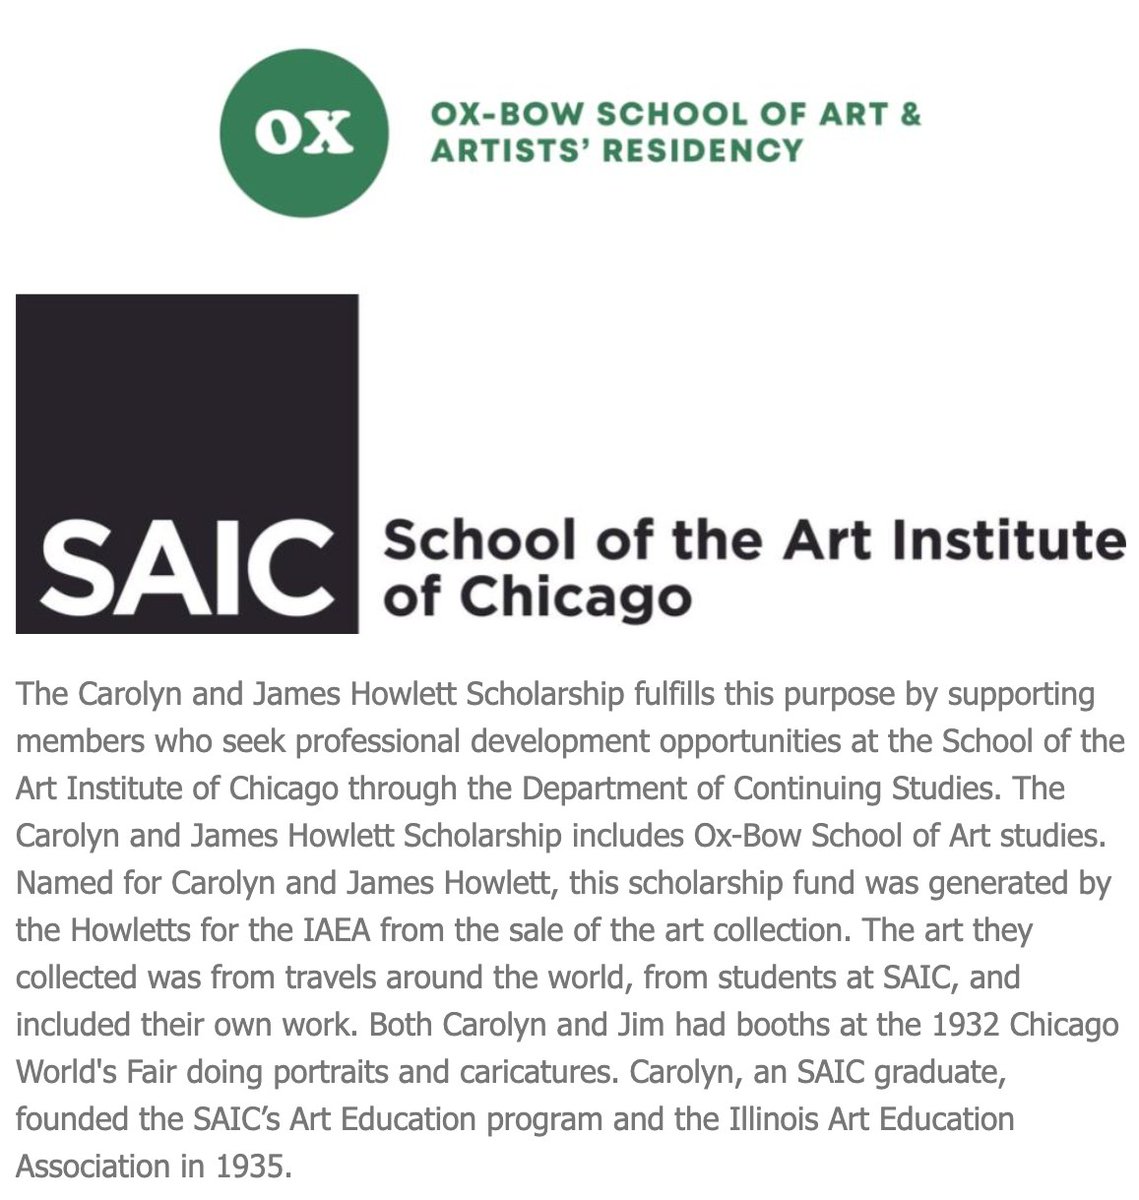 The Carolyn and James Howlett Scholarship fulfills this purpose by supporting members who seek professional development opportunities at the School of the Art Institute of Chicago through the Department of Continuing Studies. ow.ly/ffw750RaQhi